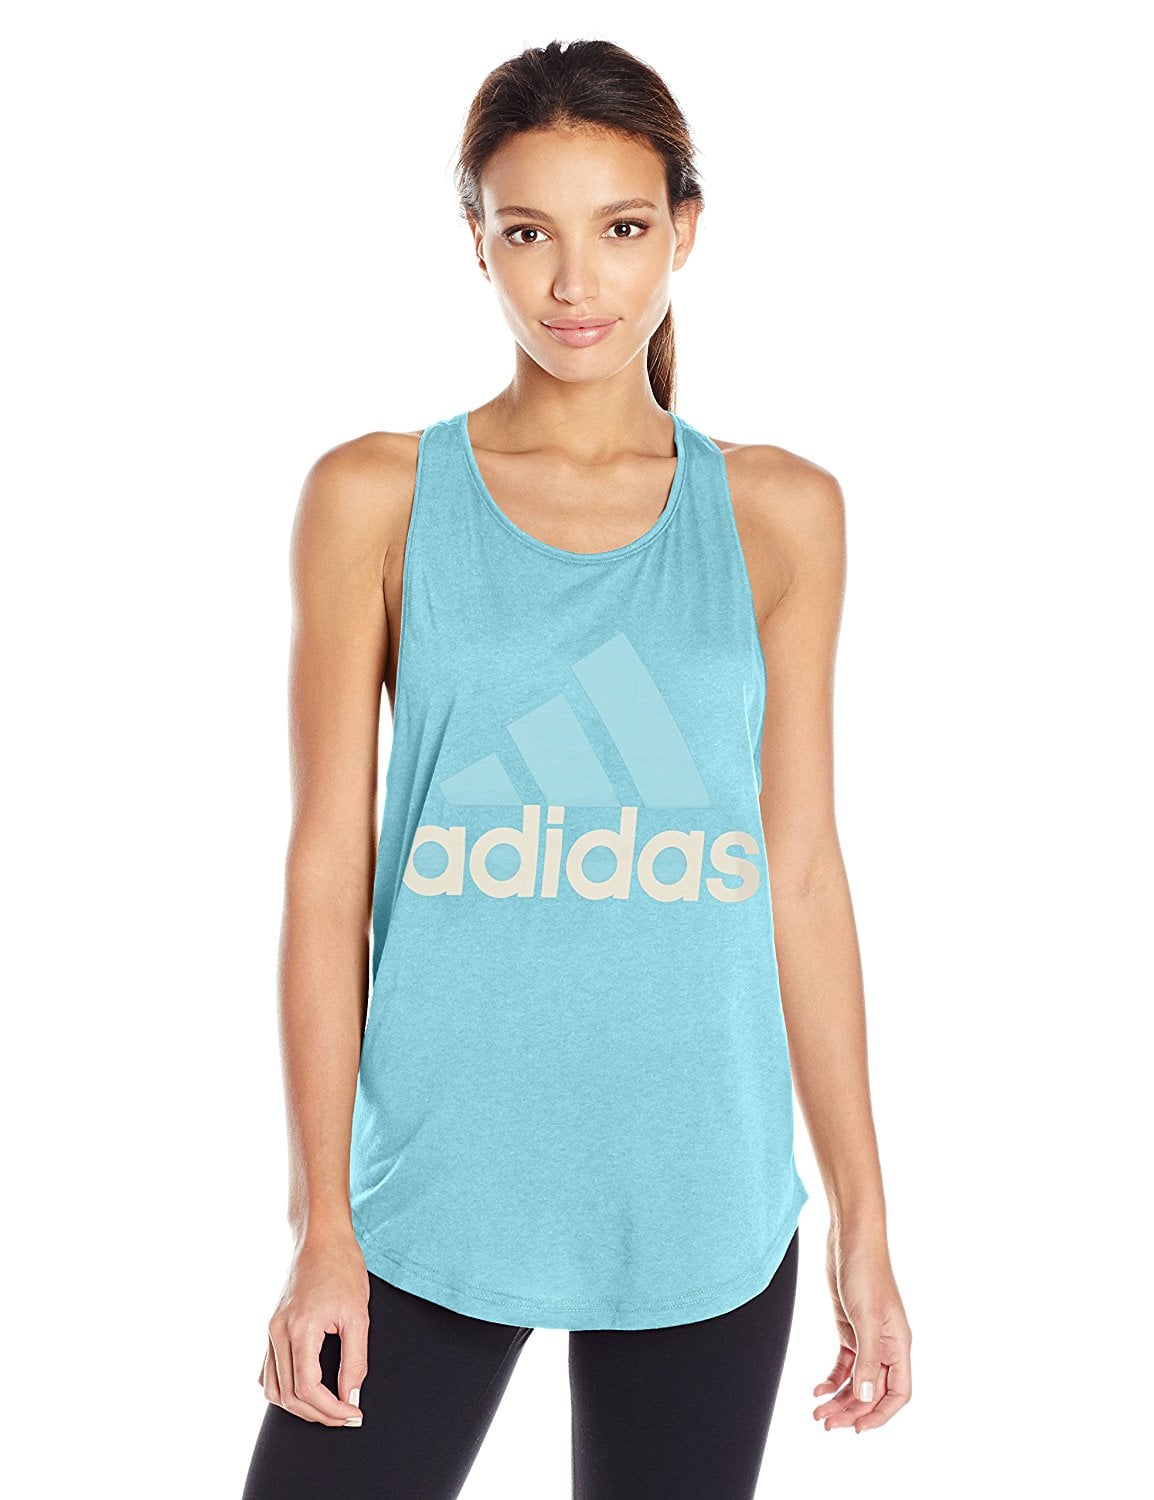 adidas fitness top - 62% remise - www 